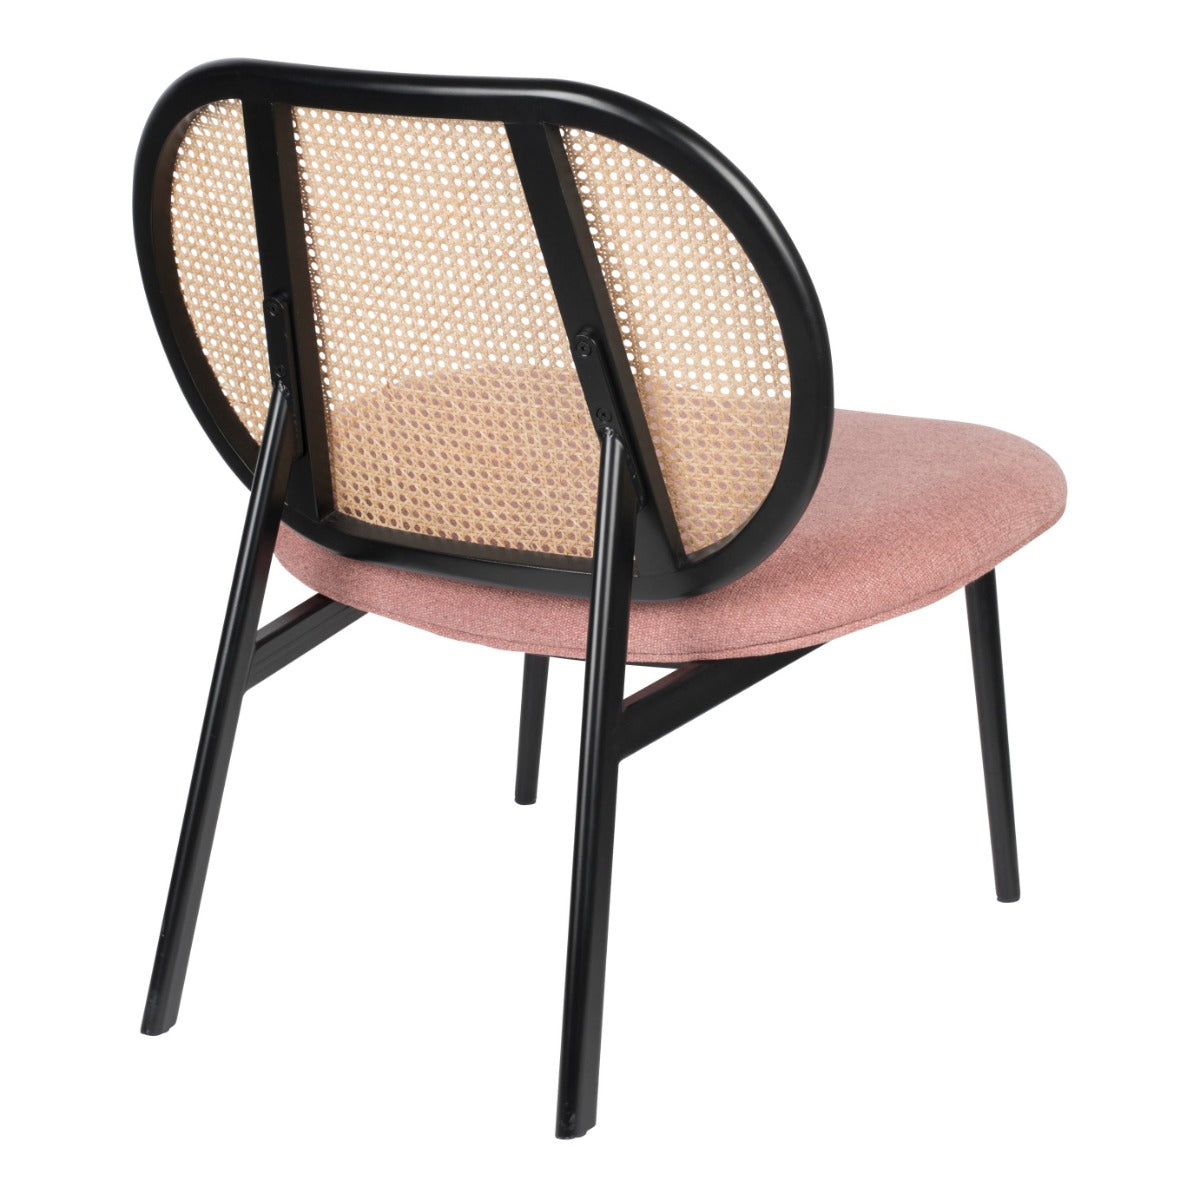 SPIKE armchair pink with rattan backrest, Zuiver, Eye on Design